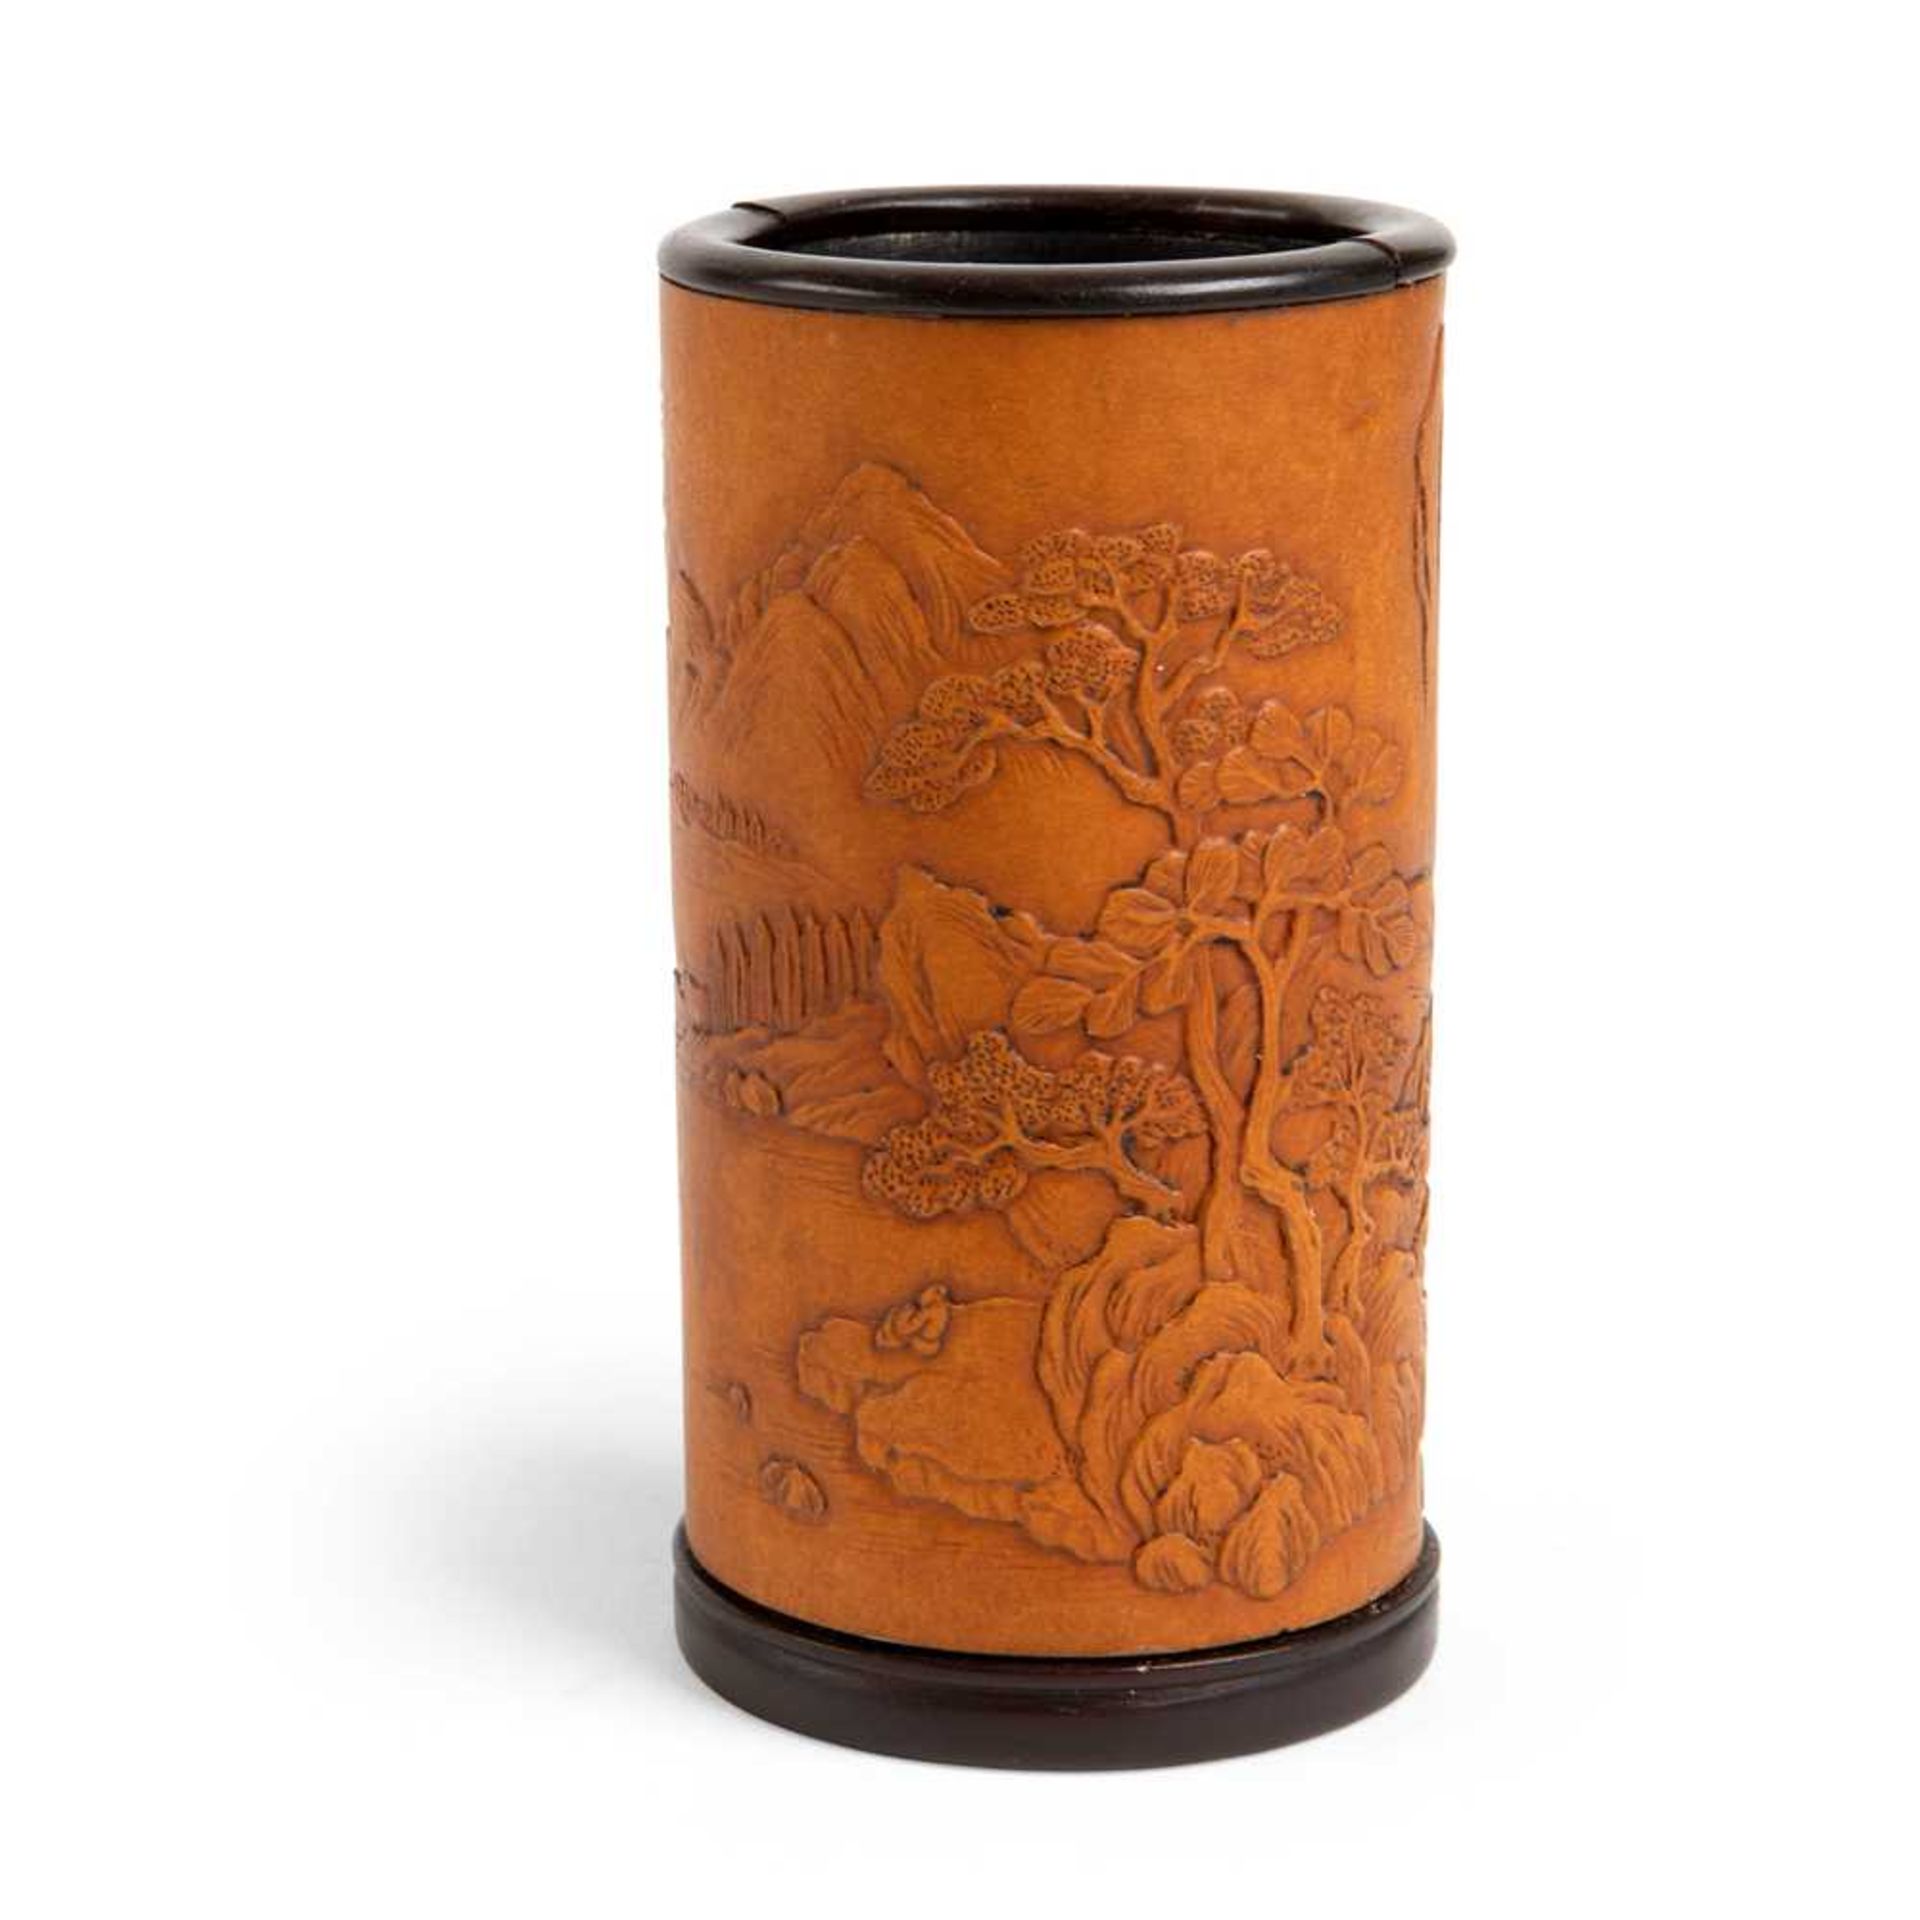 MOULDED GOURD 'LANDSCAPE' BRUSH POT LATE QING DYNASTY-REPUBLIC PERIOD, 19TH-20TH CENTURY